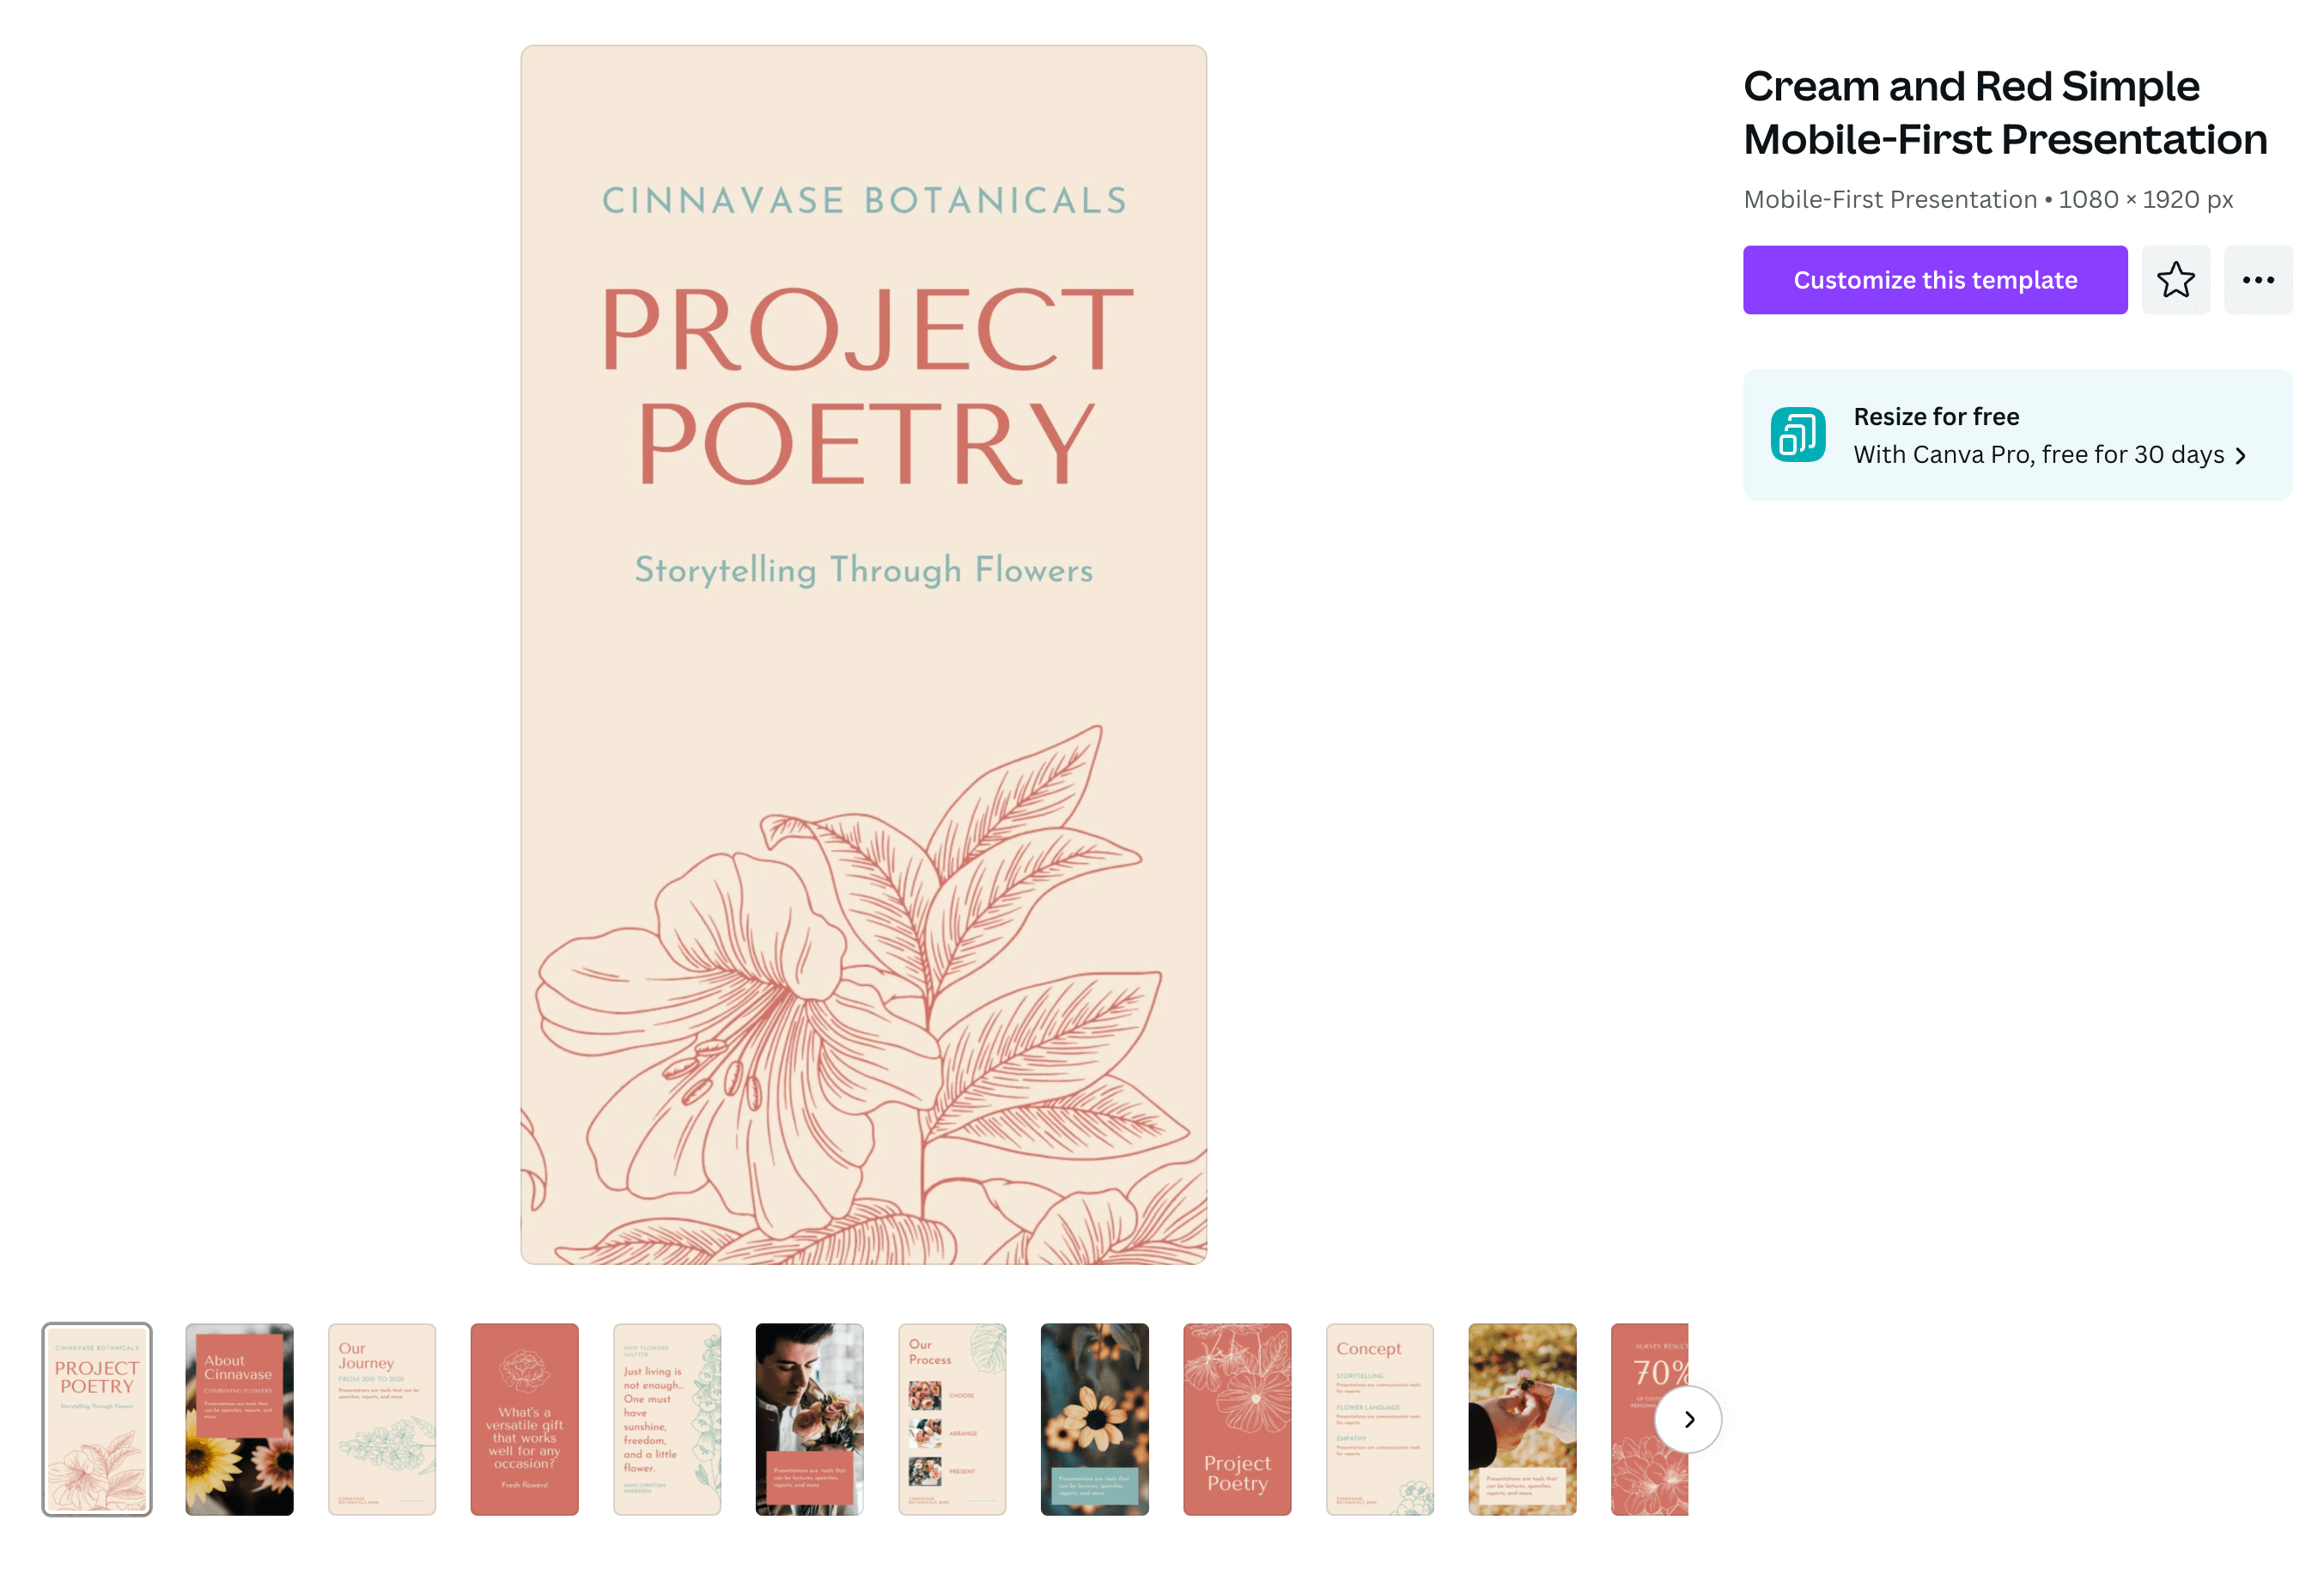 A beige phone-shaped slideshow template. The first slide says "Cinnavase Botanicals Poetry Project: Storytelling Through Flowers" and has an illustration of a flower